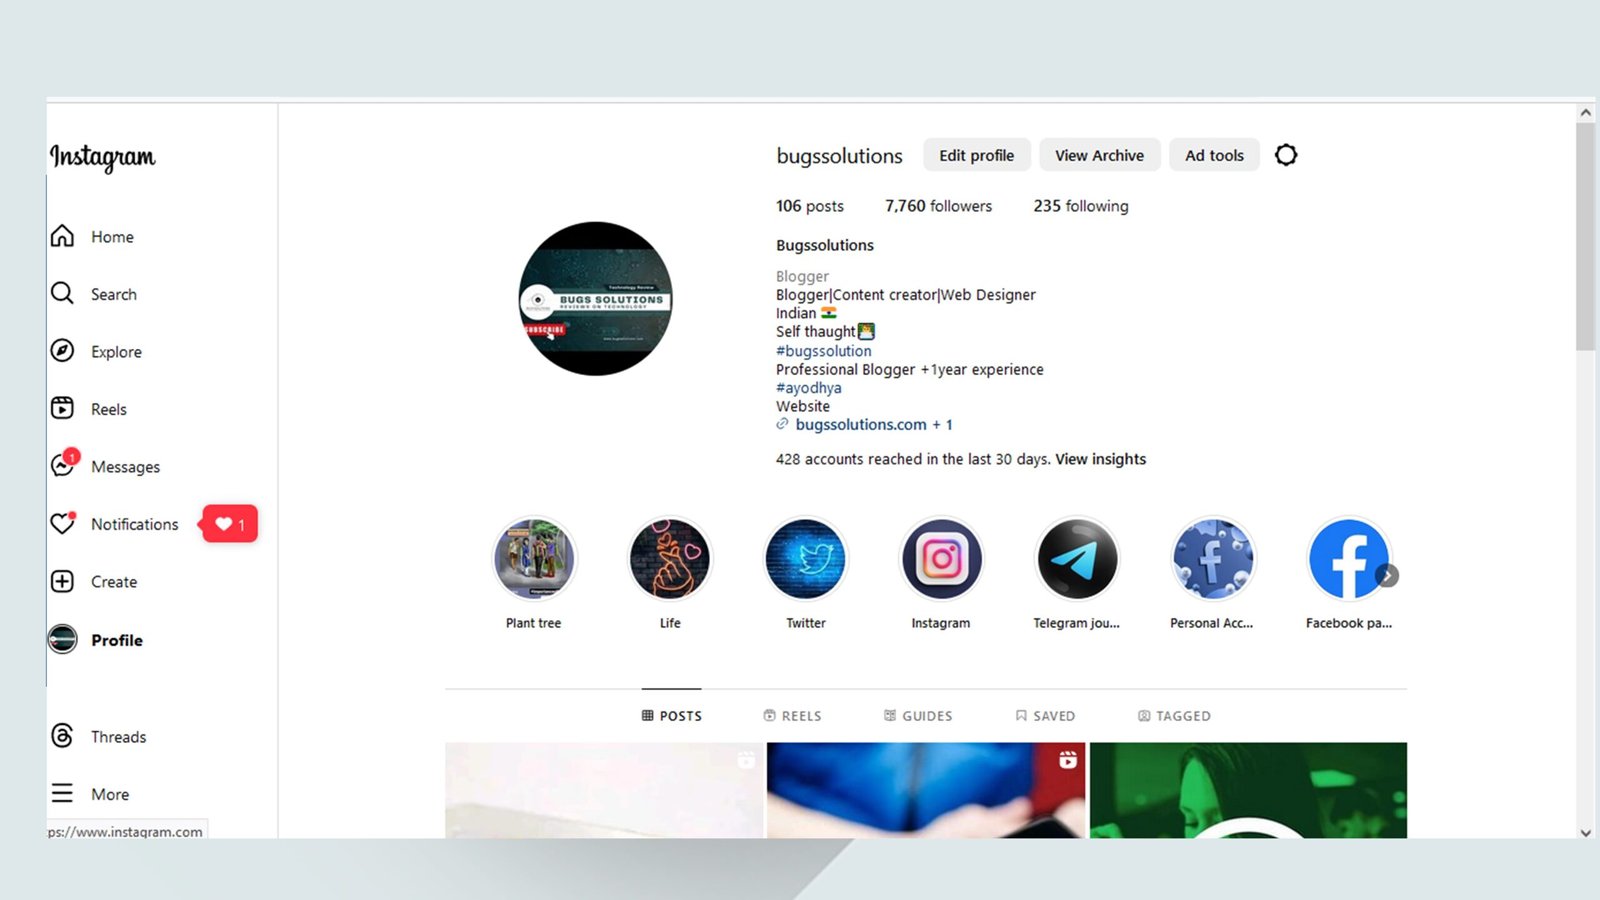 How to use Instagram in a web browser